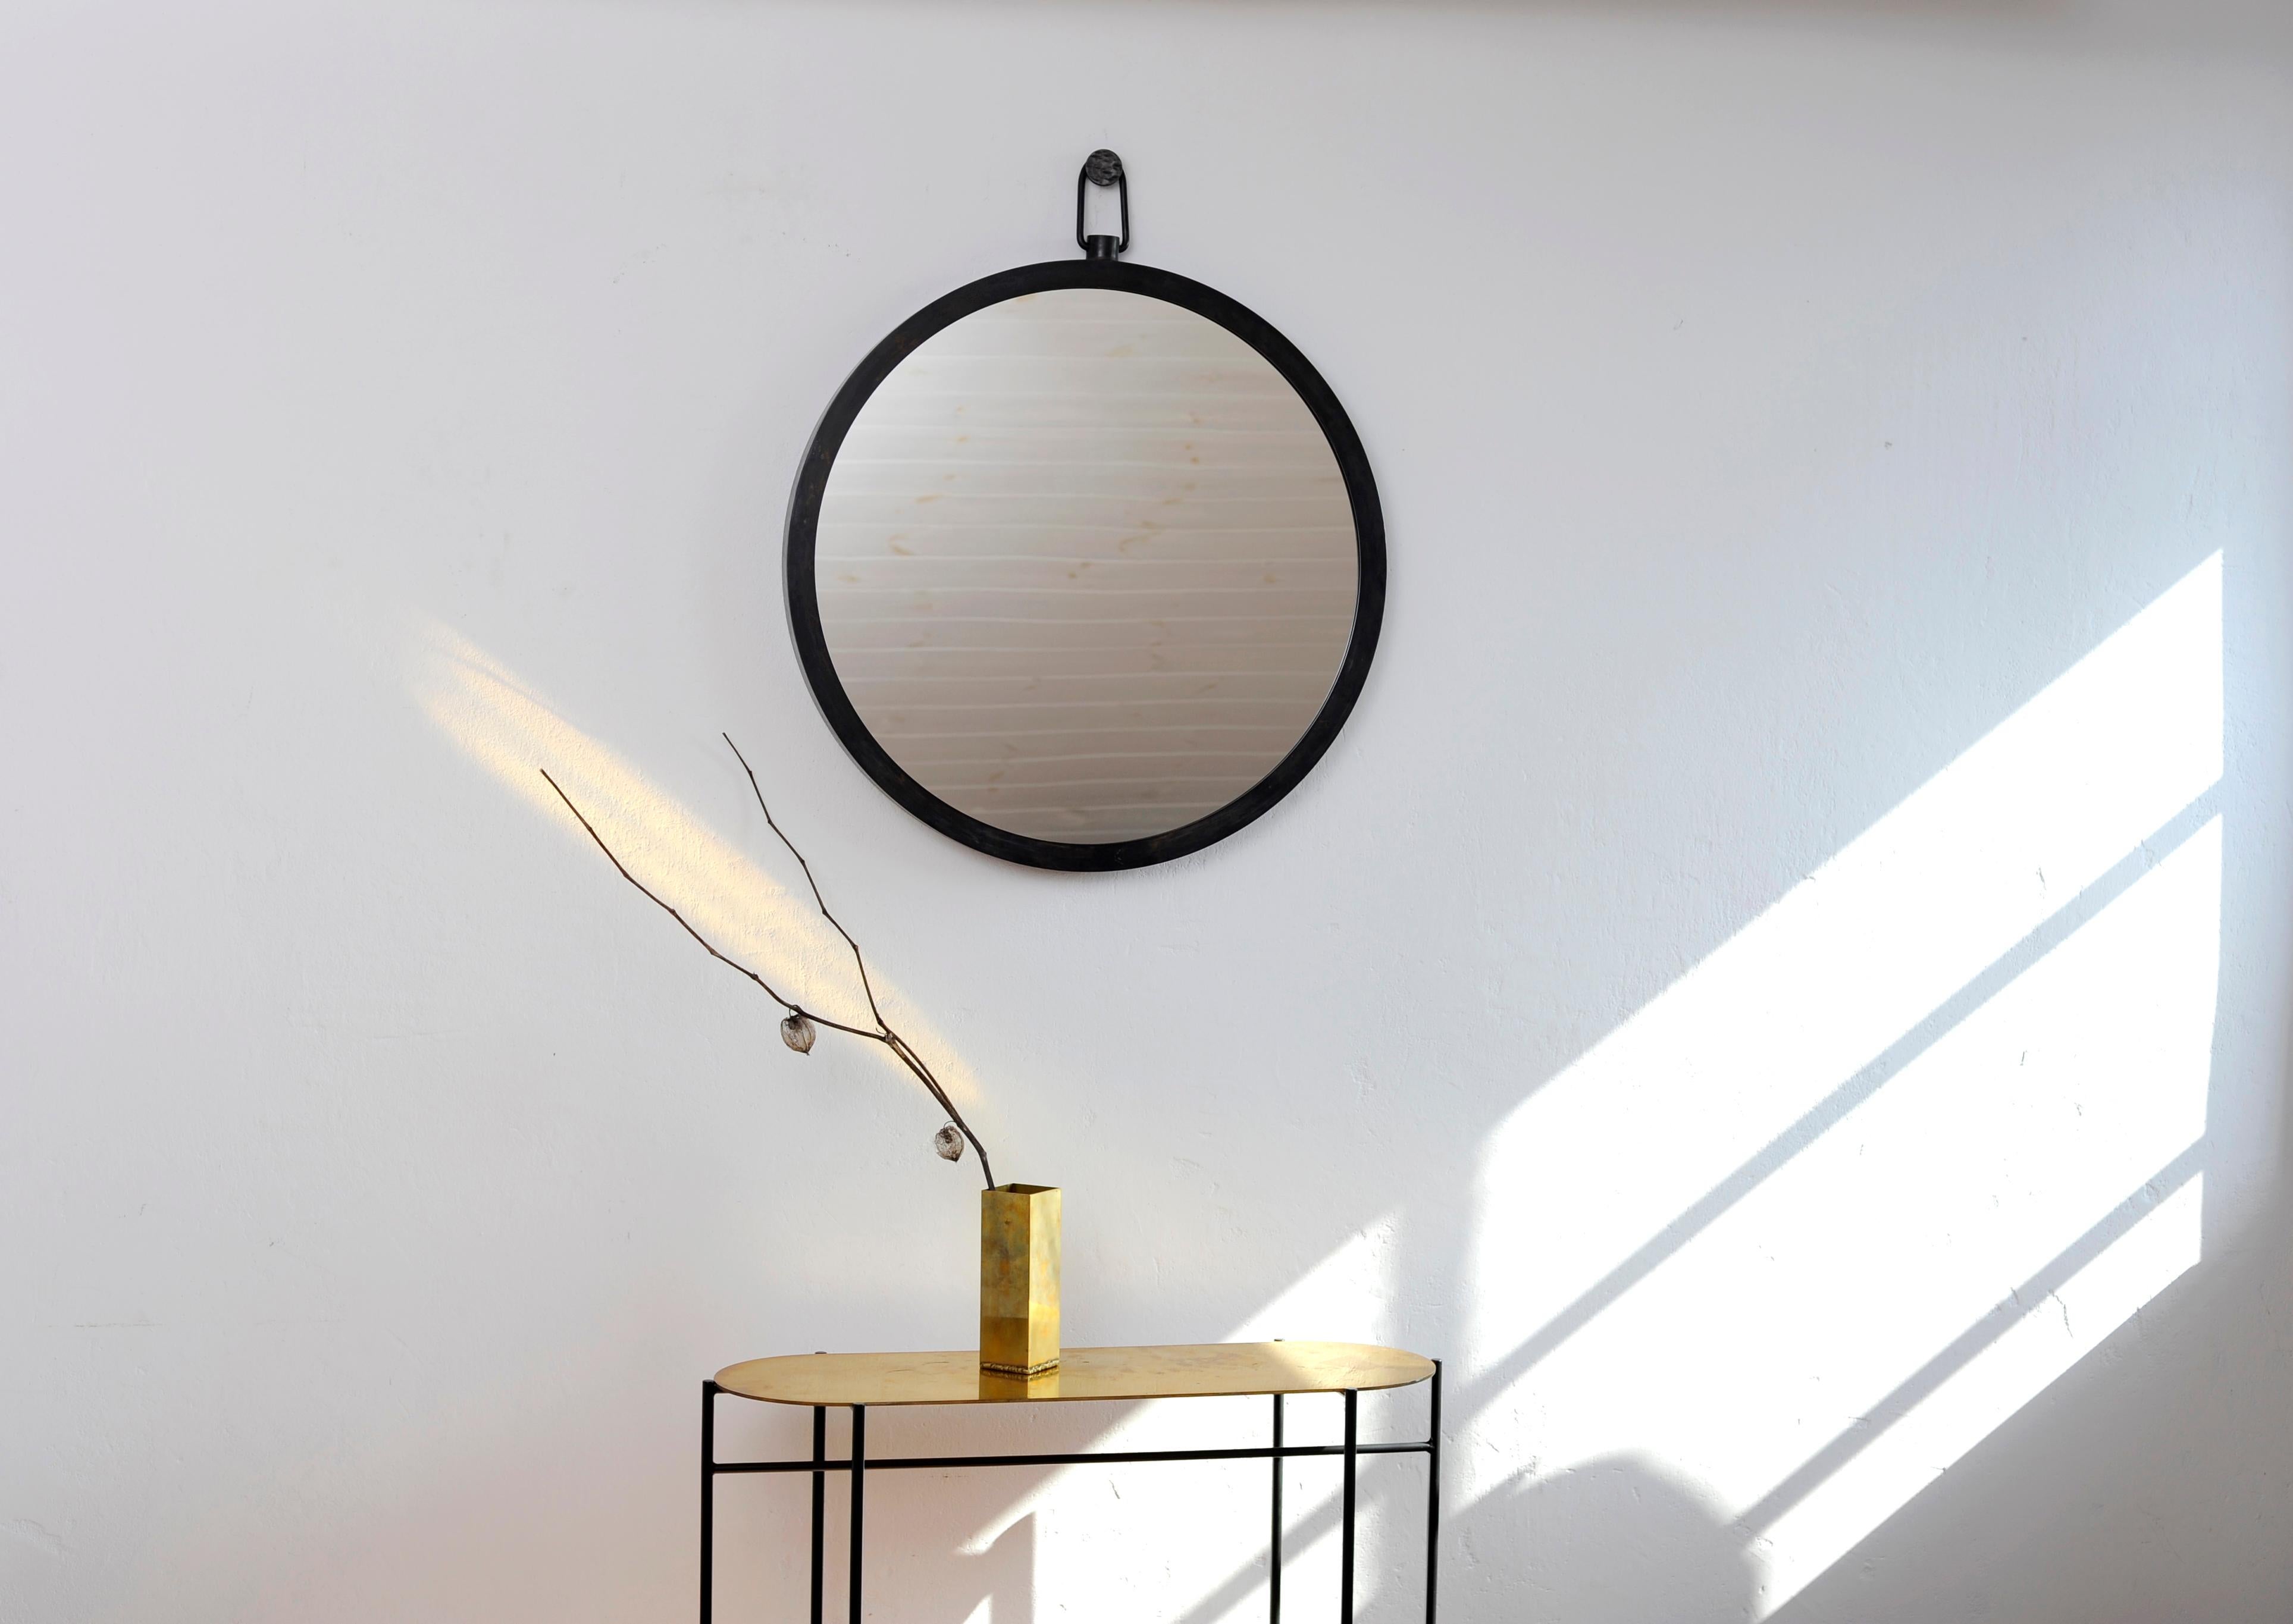 “Plain” mirror by Lukasz Friedrich.
Dimensions: D 65 cm.
Materials: Steel, mirror.
Also available in black patina on steel, stainless steel, dimensions can be customized.

Comes with wall fixation.

Lukasz Friedrich (born 1980), lives and